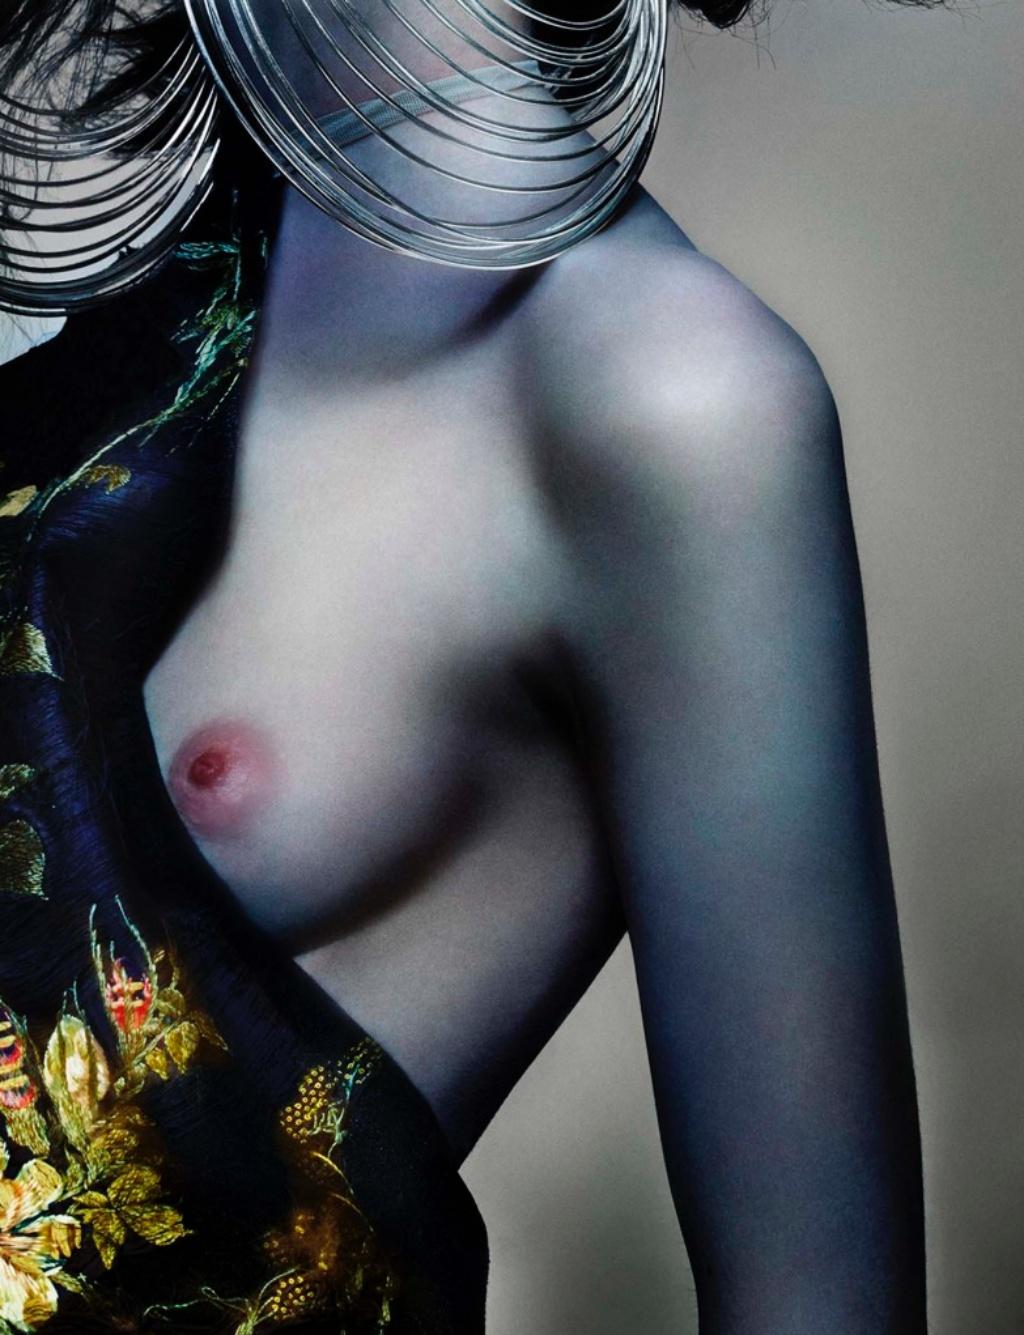 Stella Lucia Deopito Profile wearing Alexander McQueen – Nick Knight/Photography For Sale 1